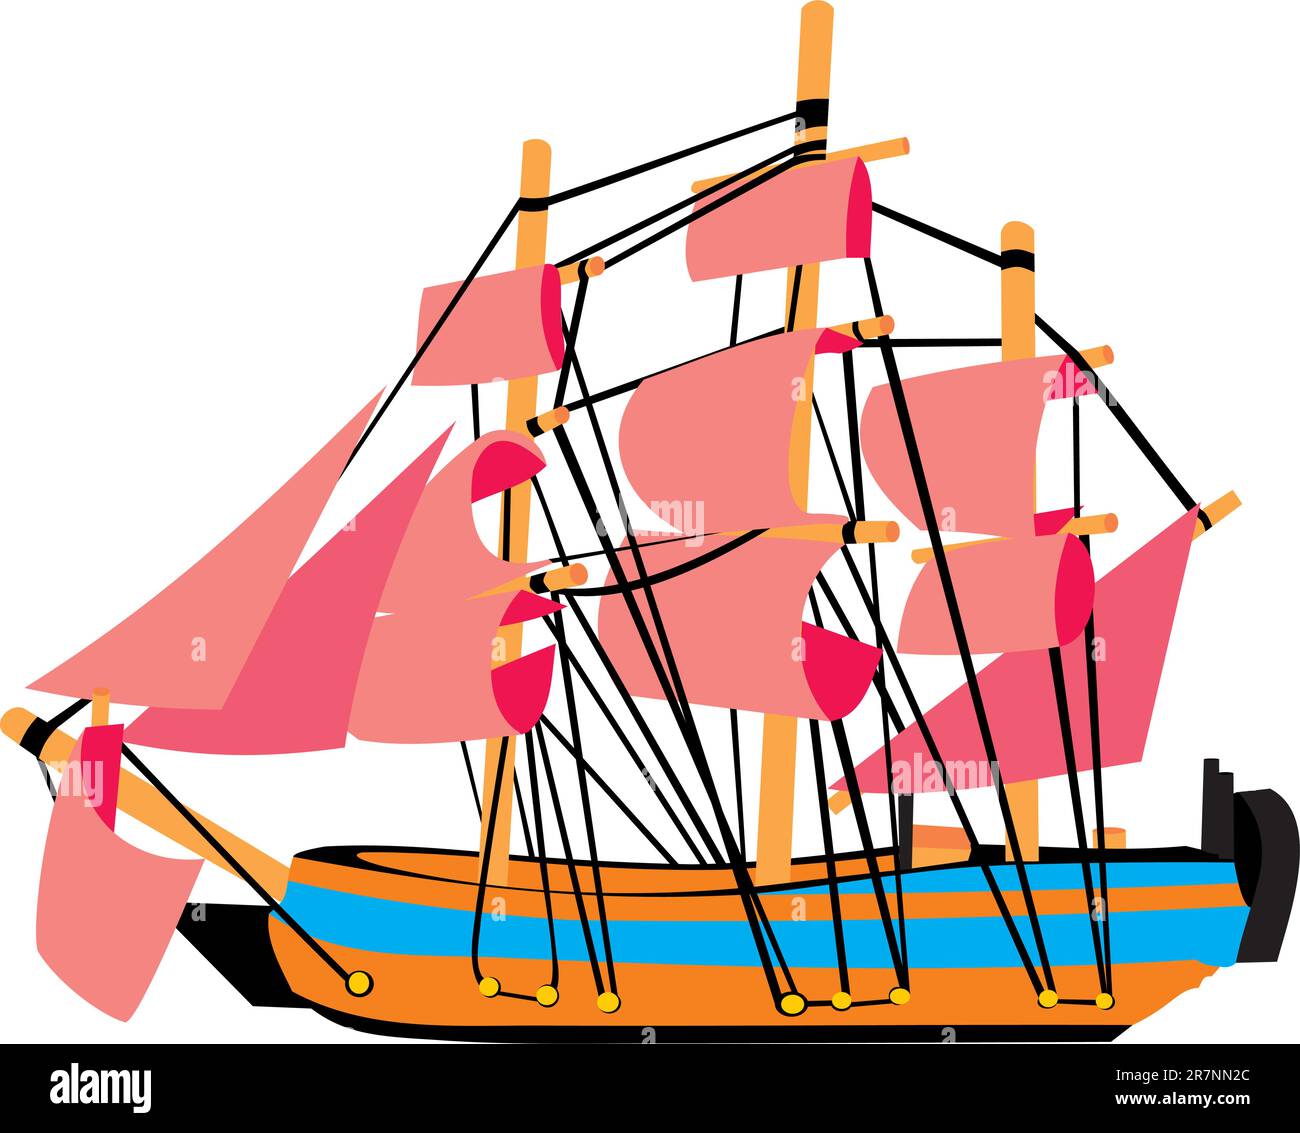 Fighting frigate. Crimson sails. The military ship Stock Vector